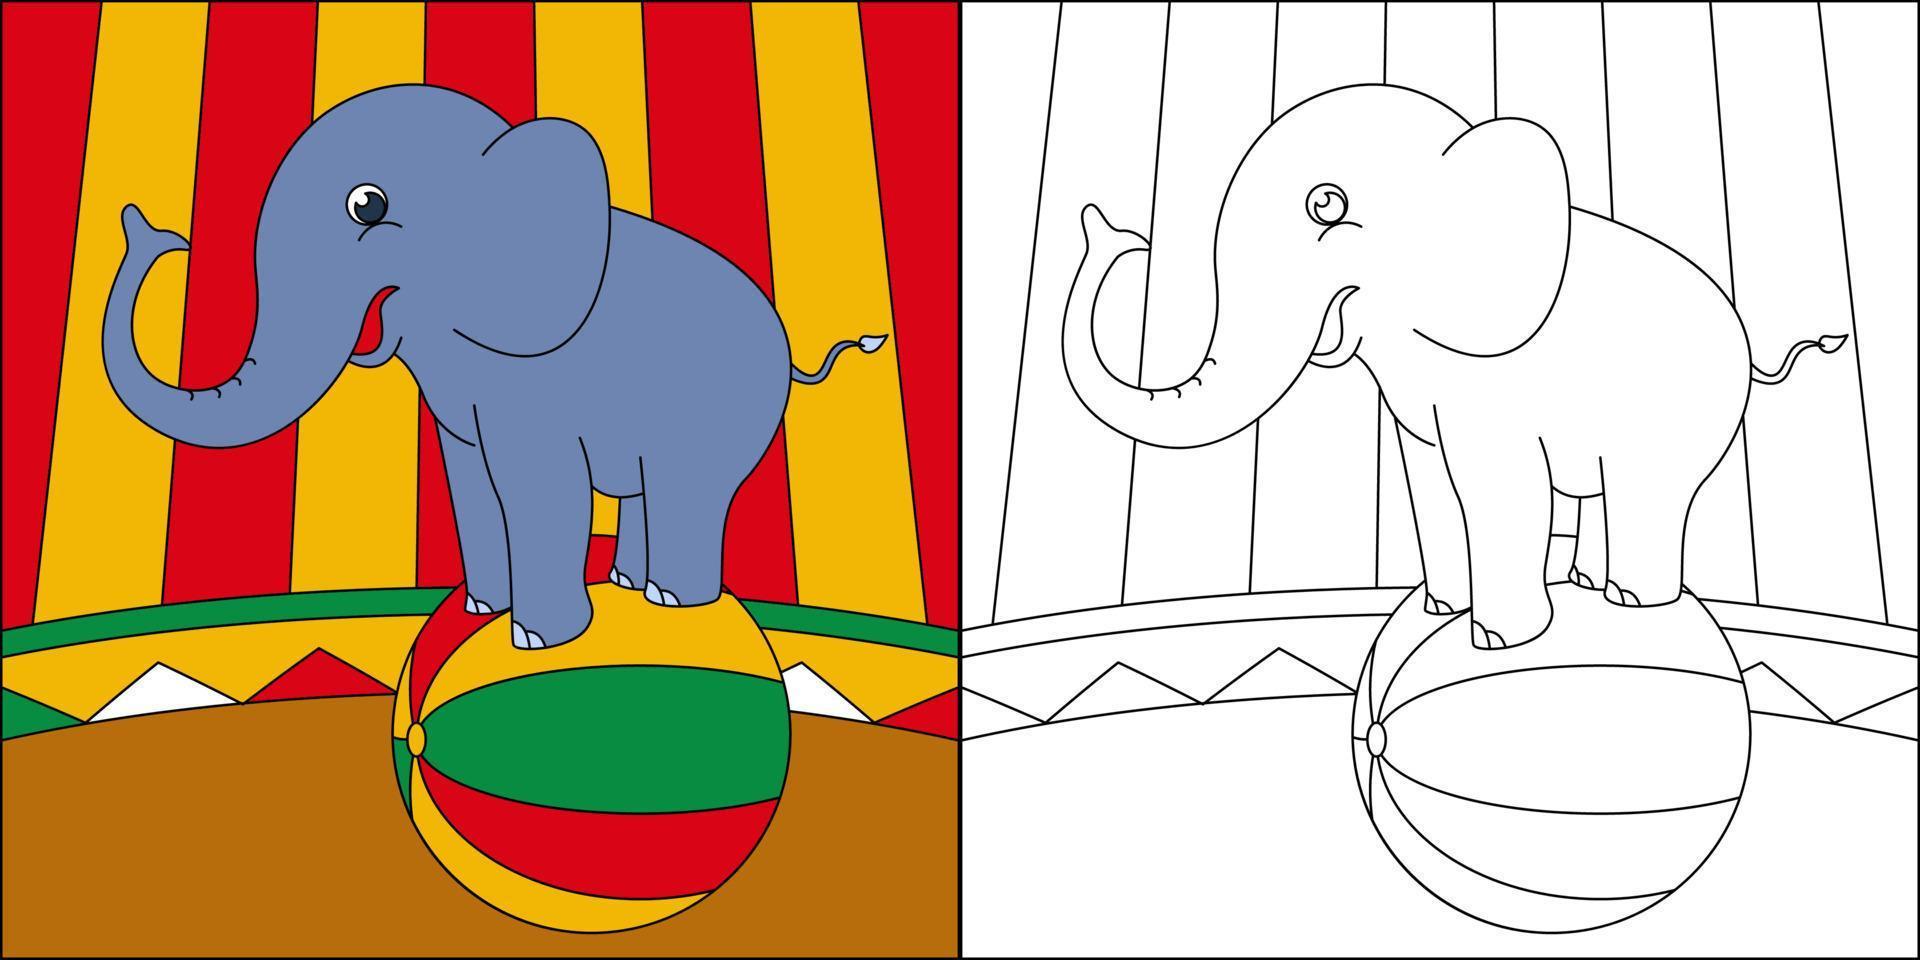 Elephant circus show suitable for children's coloring page vector illustration